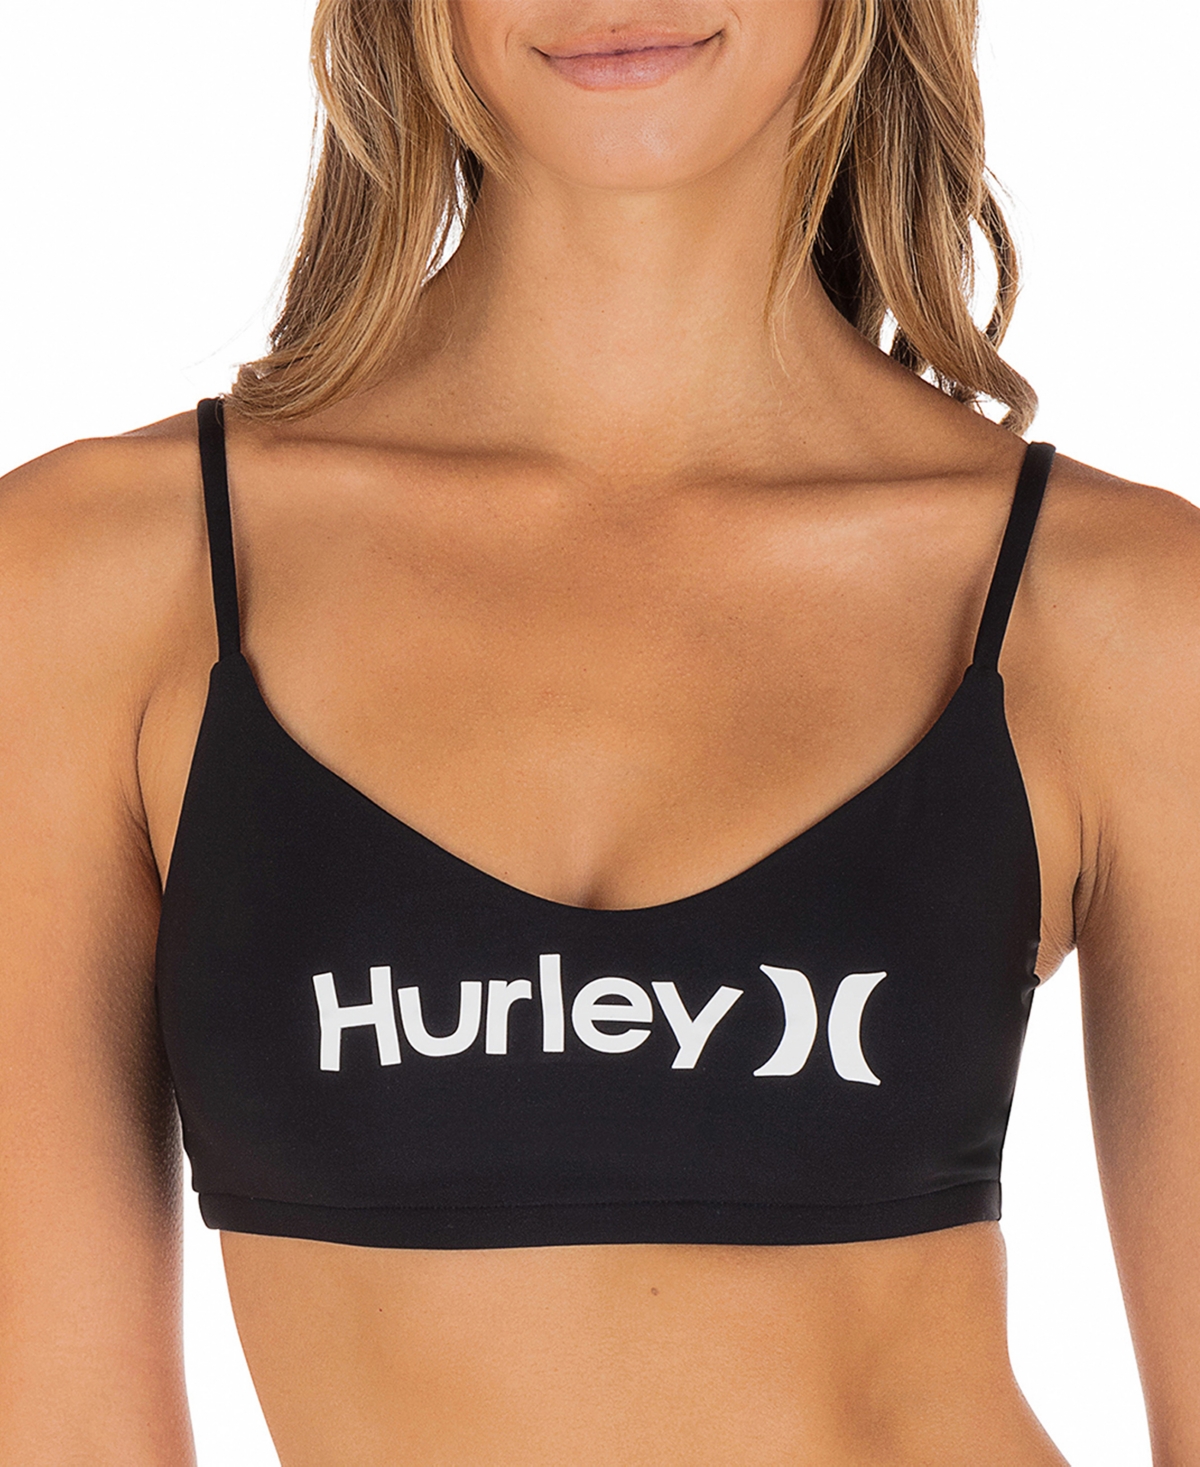 Hurley Juniors' Solid One And Only Adjustable-Strap Bralette Bikini Top Women's Swimsuit